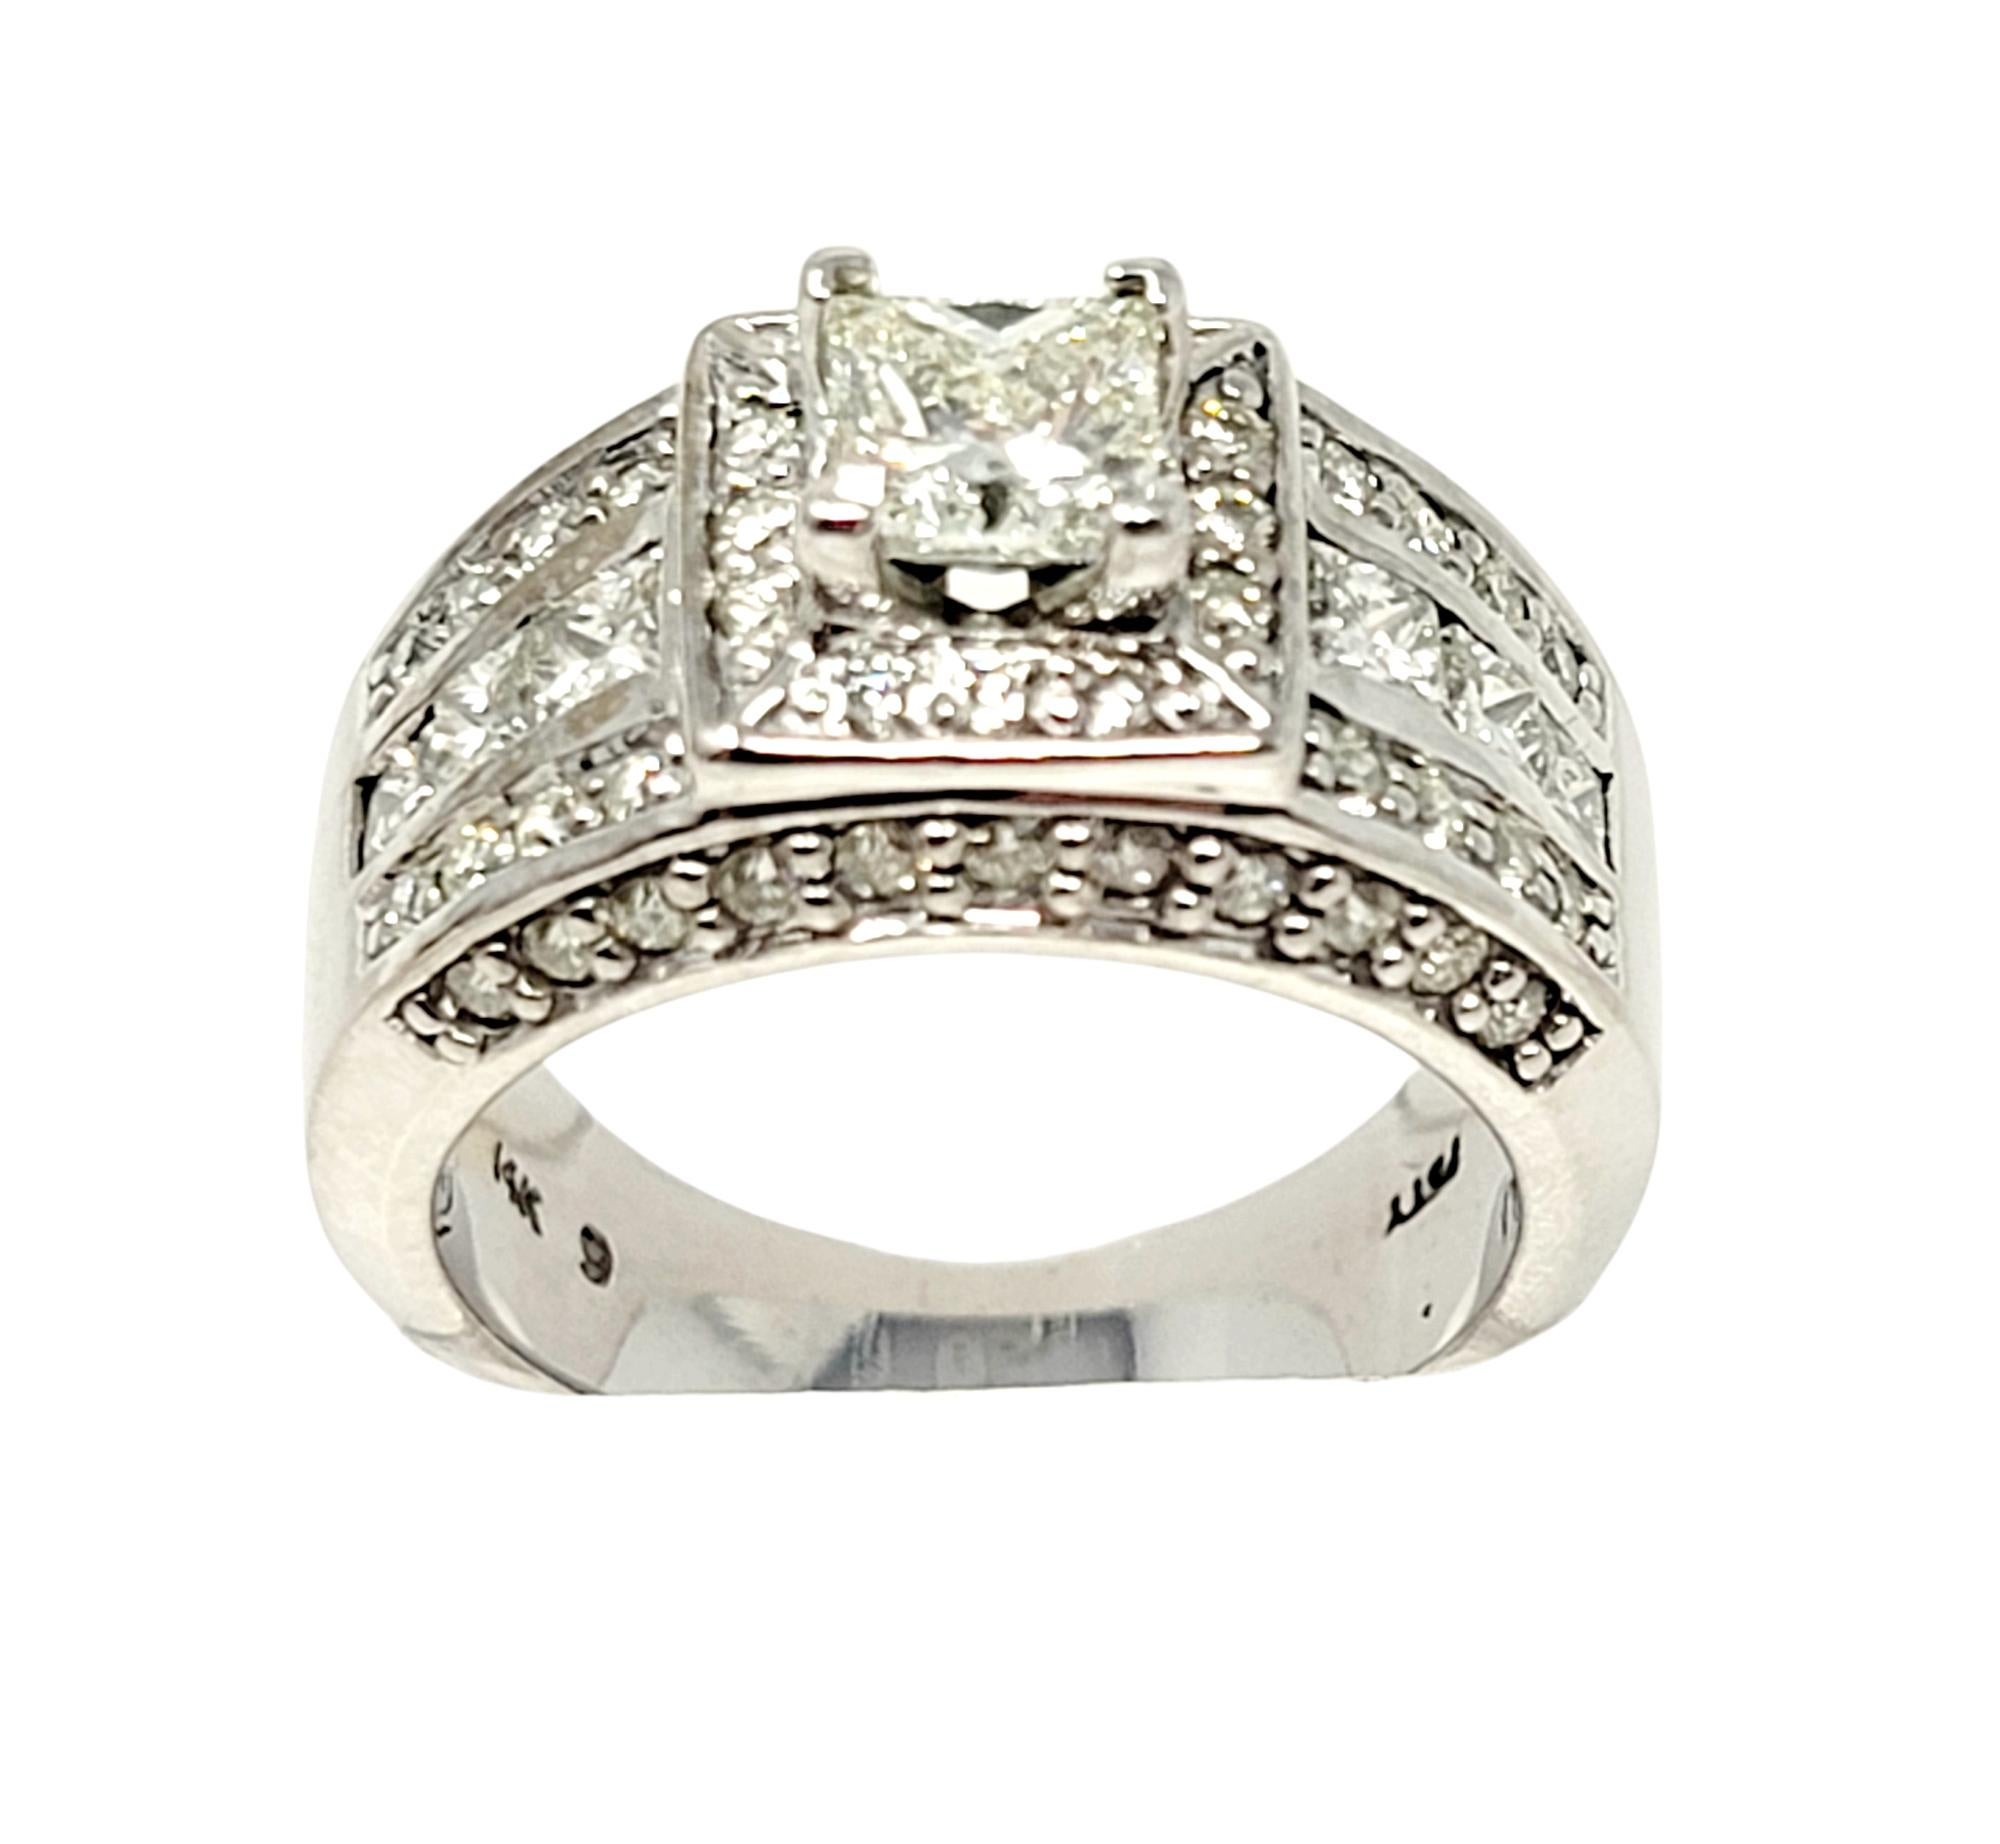 Ring size: 7.5

Beautiful princess cut diamond engagement ring with wide multi-row embellished shank. This incredibly sparkly piece is filled with diamonds from end to end. The square center stone is prong set at the center of the piece and sits